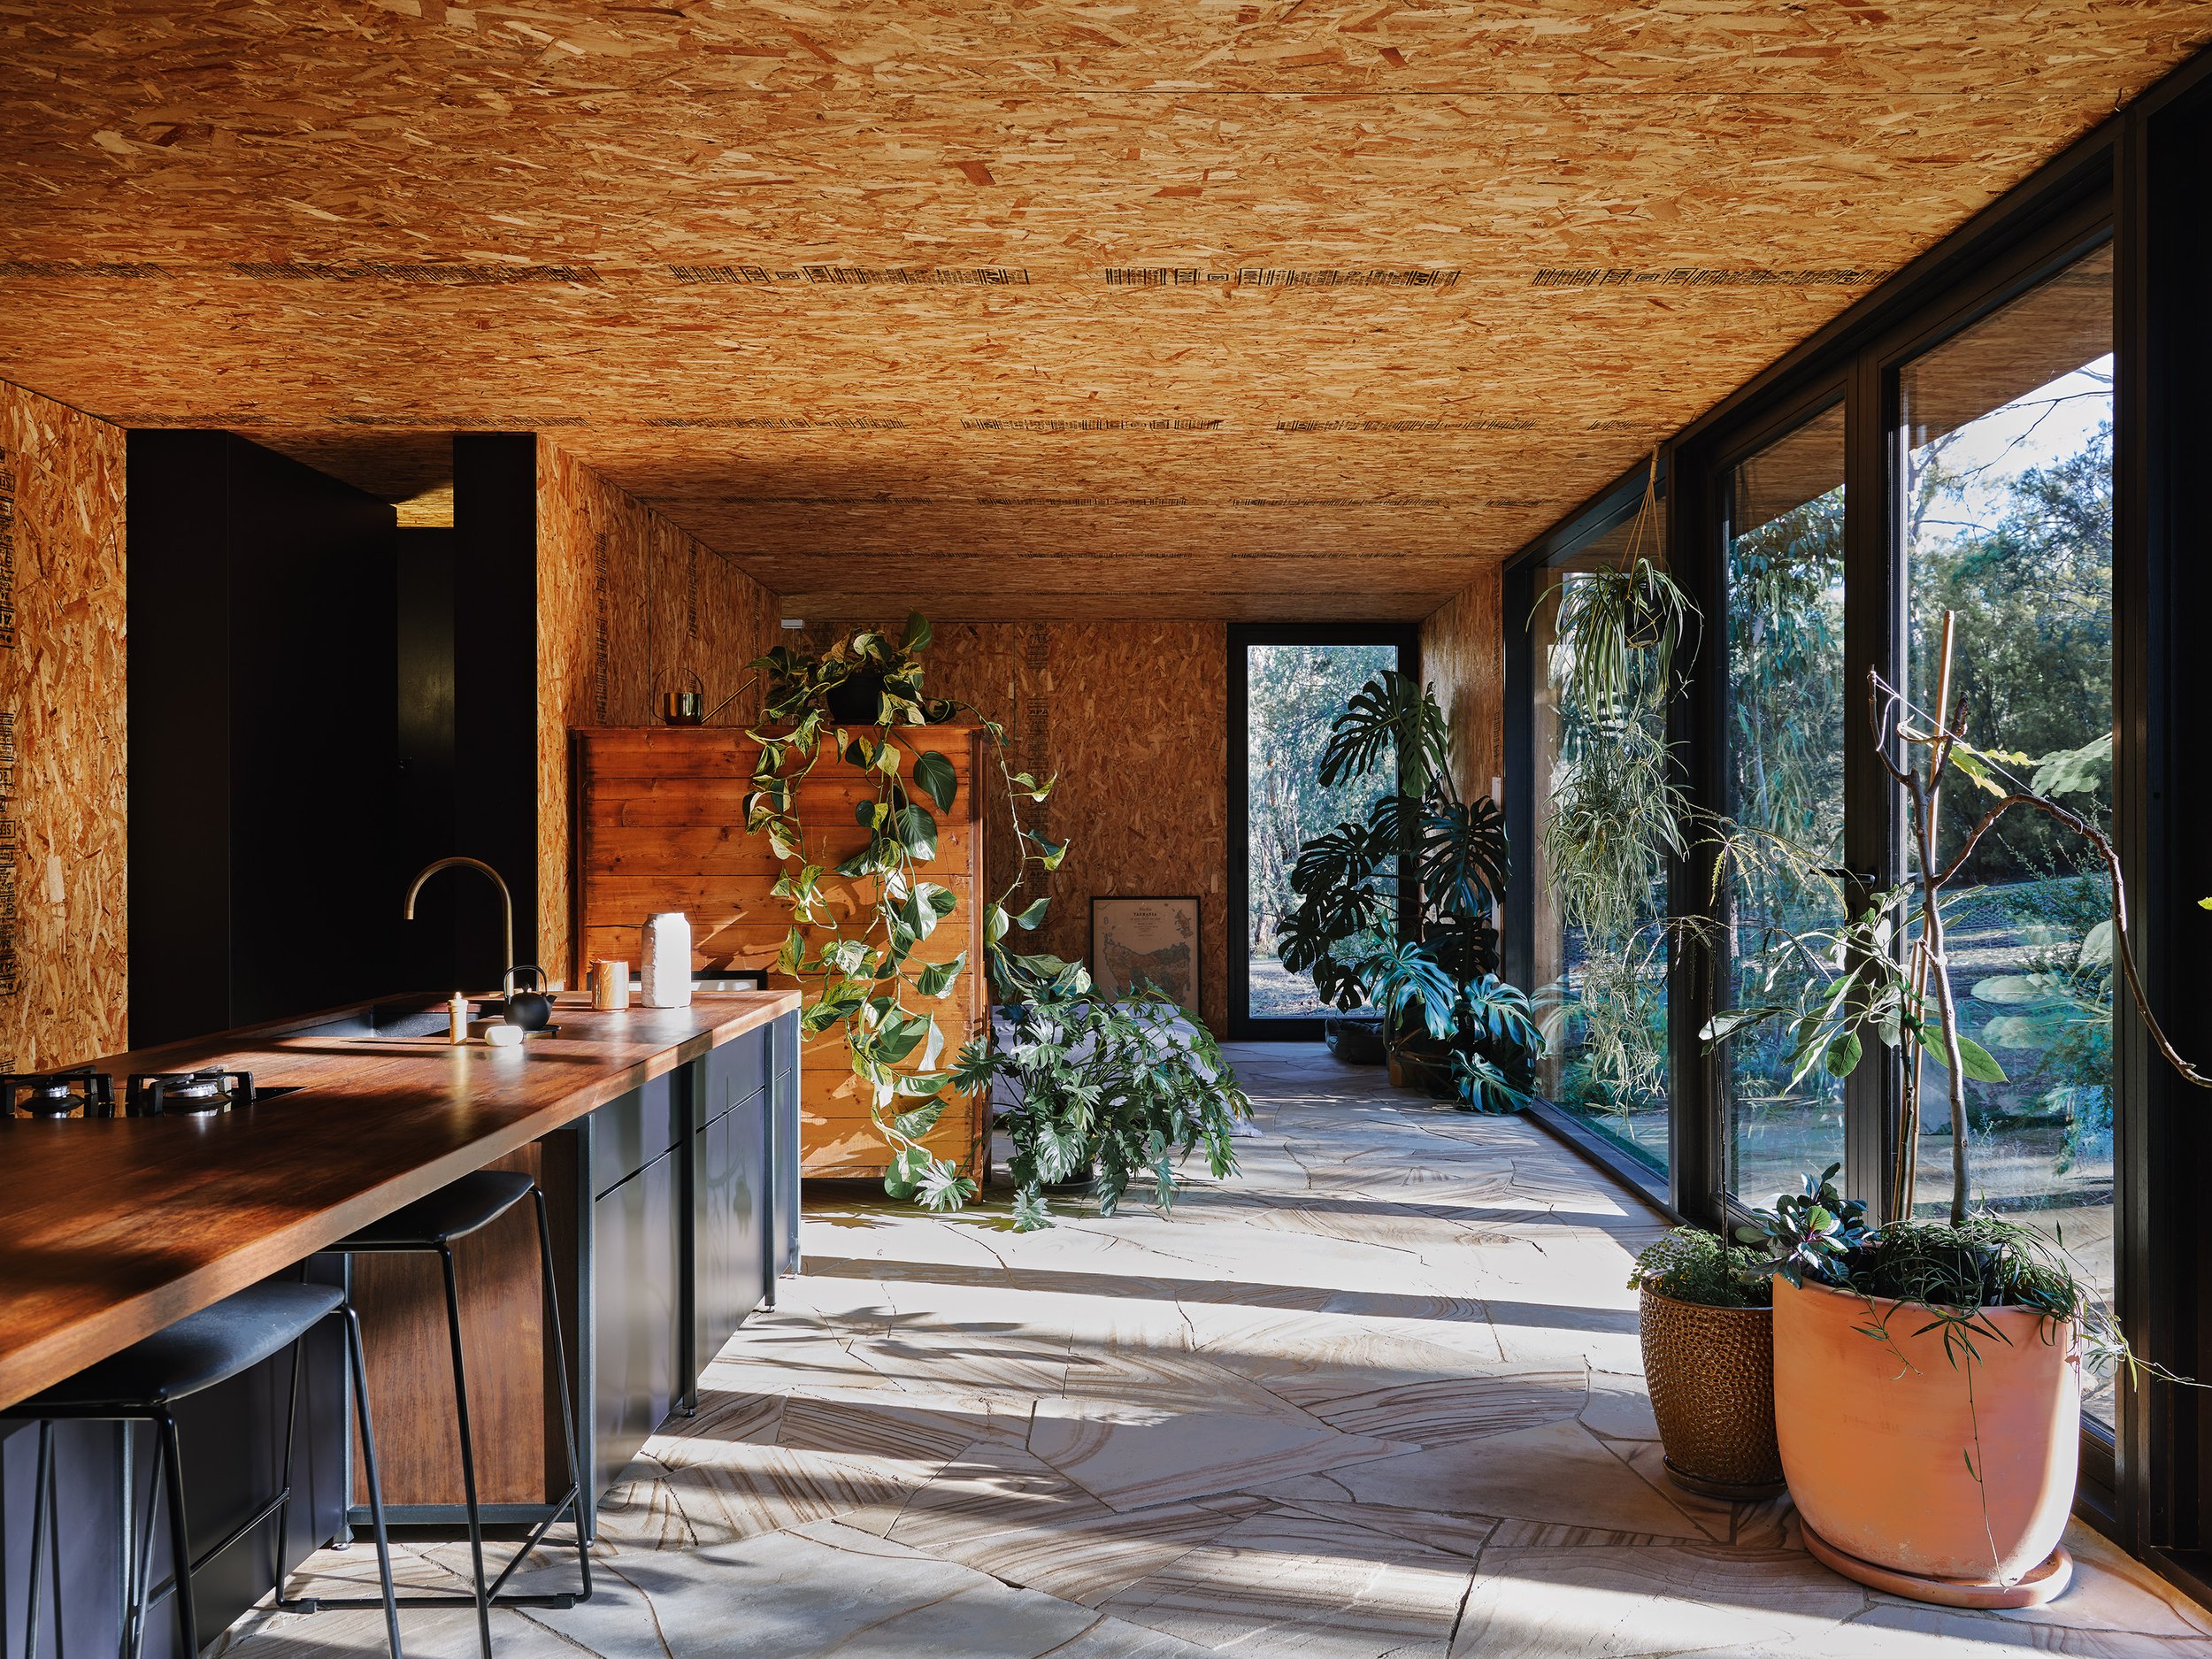 Interior space clad in OSB wood and filled with plants